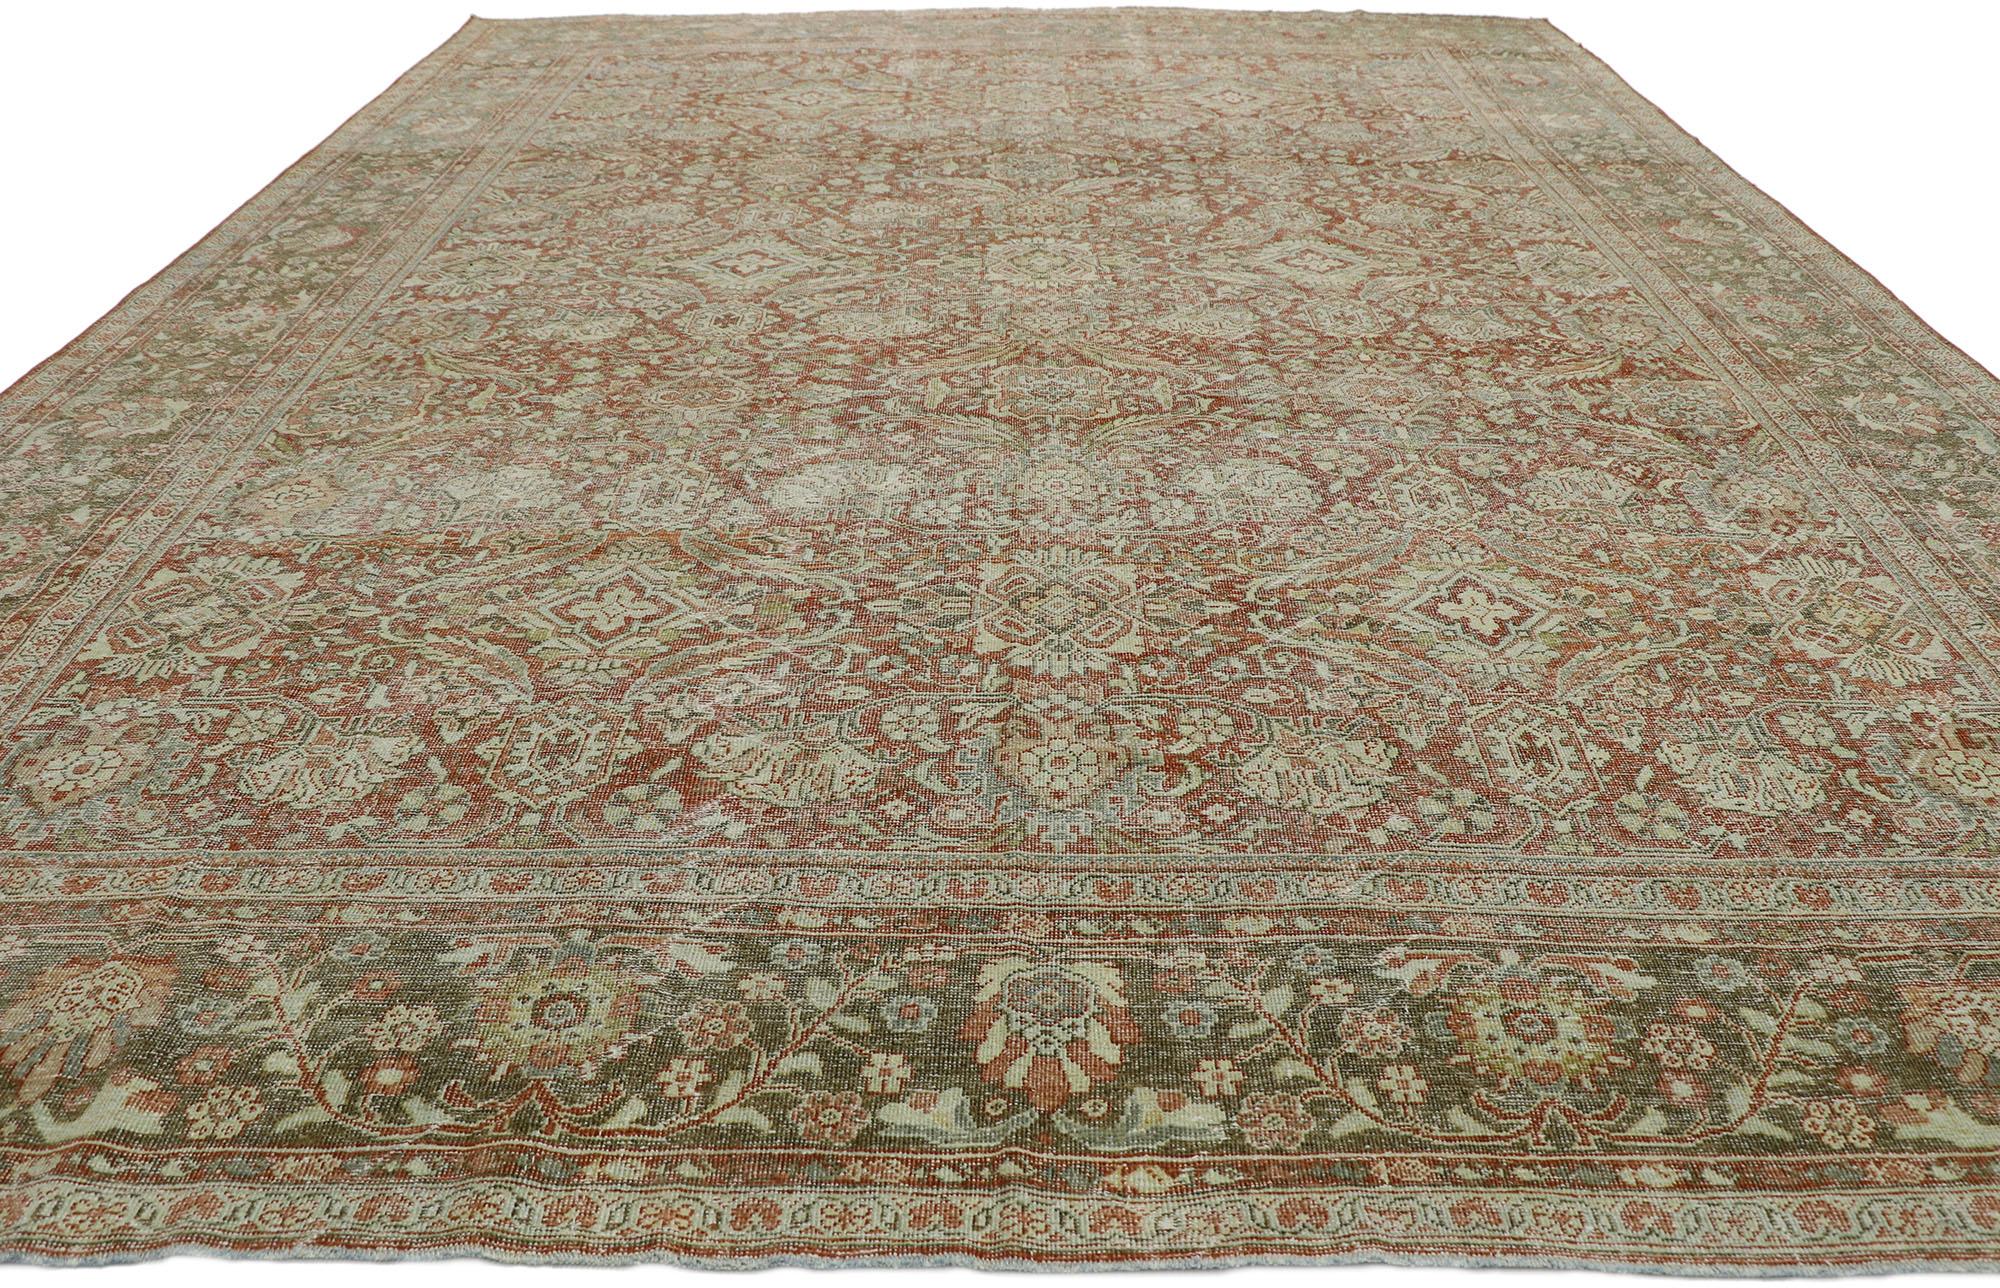 Tabriz Distressed Antique Persian Mahal Rug with Rustic American Colonial Style For Sale